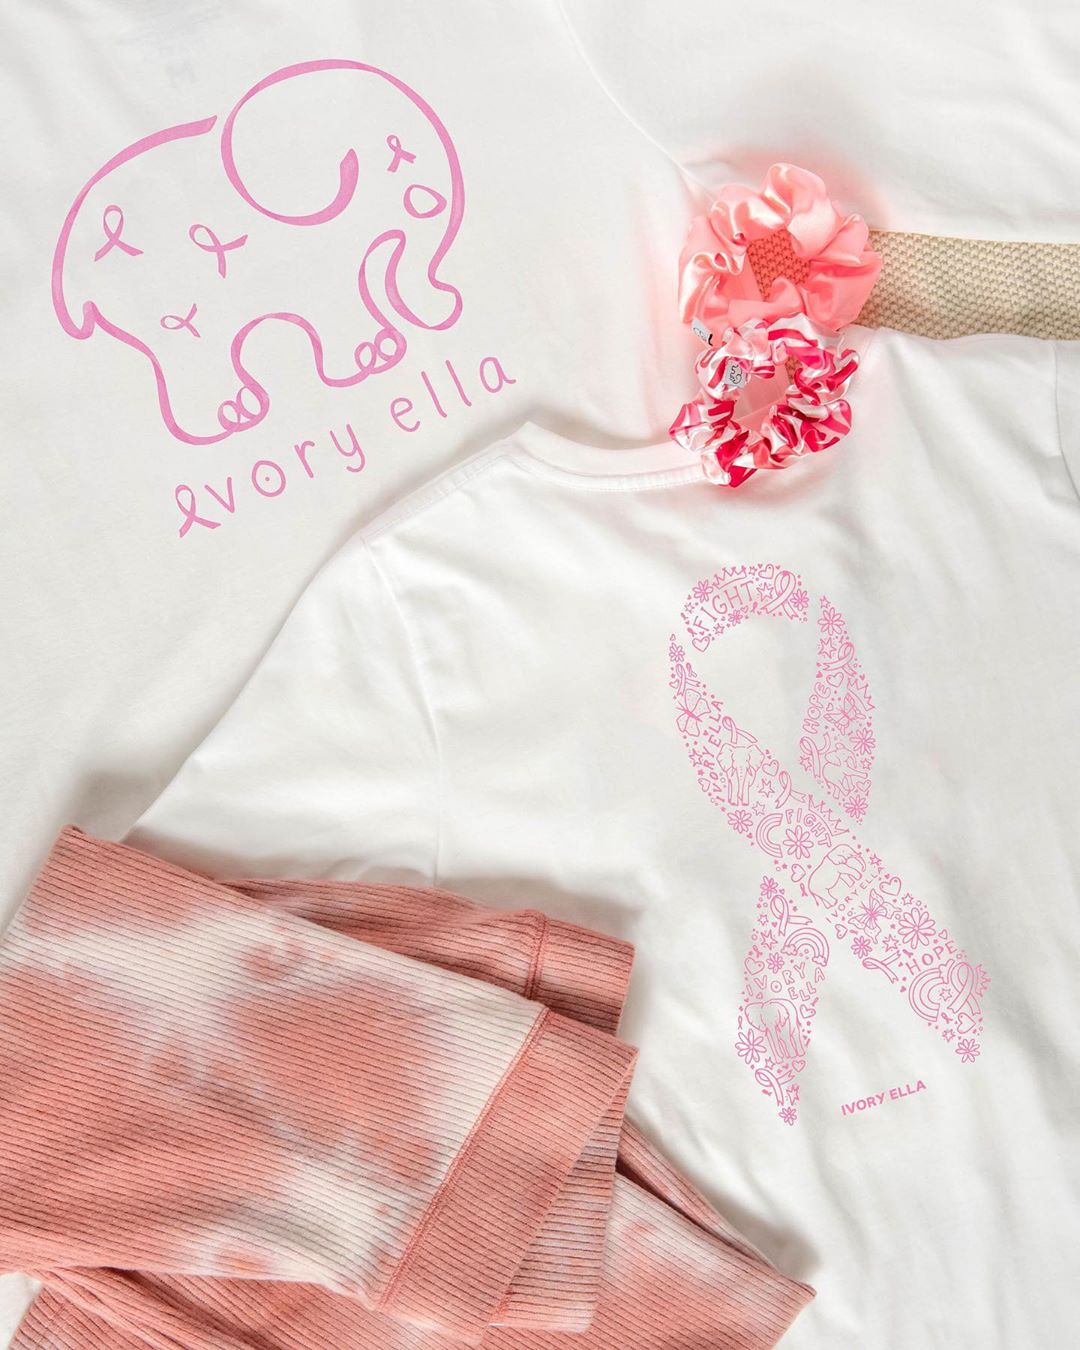 Ivory Ella - For the brave ones 💖 Our Breast Cancer Awareness collection is here! 100% of net profits from this style will go directly to @youngsurvivalcoalition. #BreastCancerAwareness #ComeTogether...